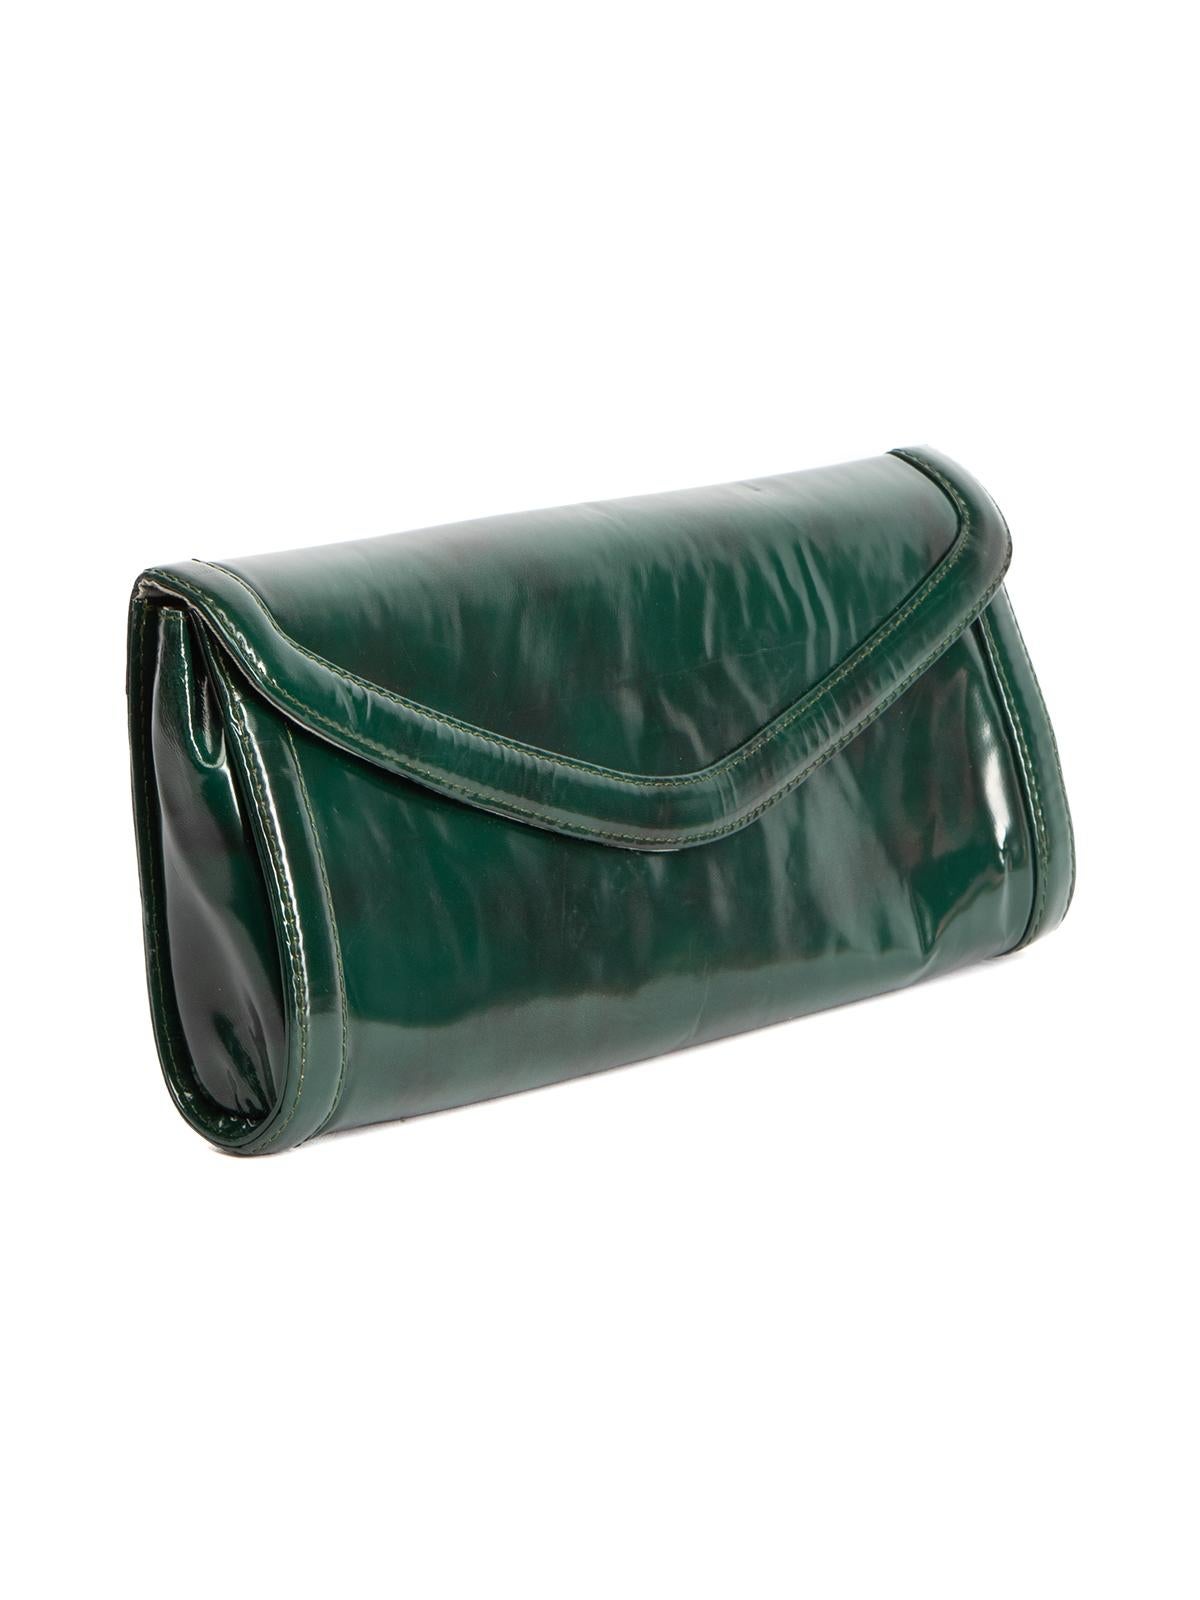 CONDITION is Good. Minor wear to clutch is evident. Light wear to Leather exterior with some creasing seen on this used Pura Lopez designer resale item. Original dust bag included.



Details 


Green 

Leather 

Clutch

Magnetic closure 

One main